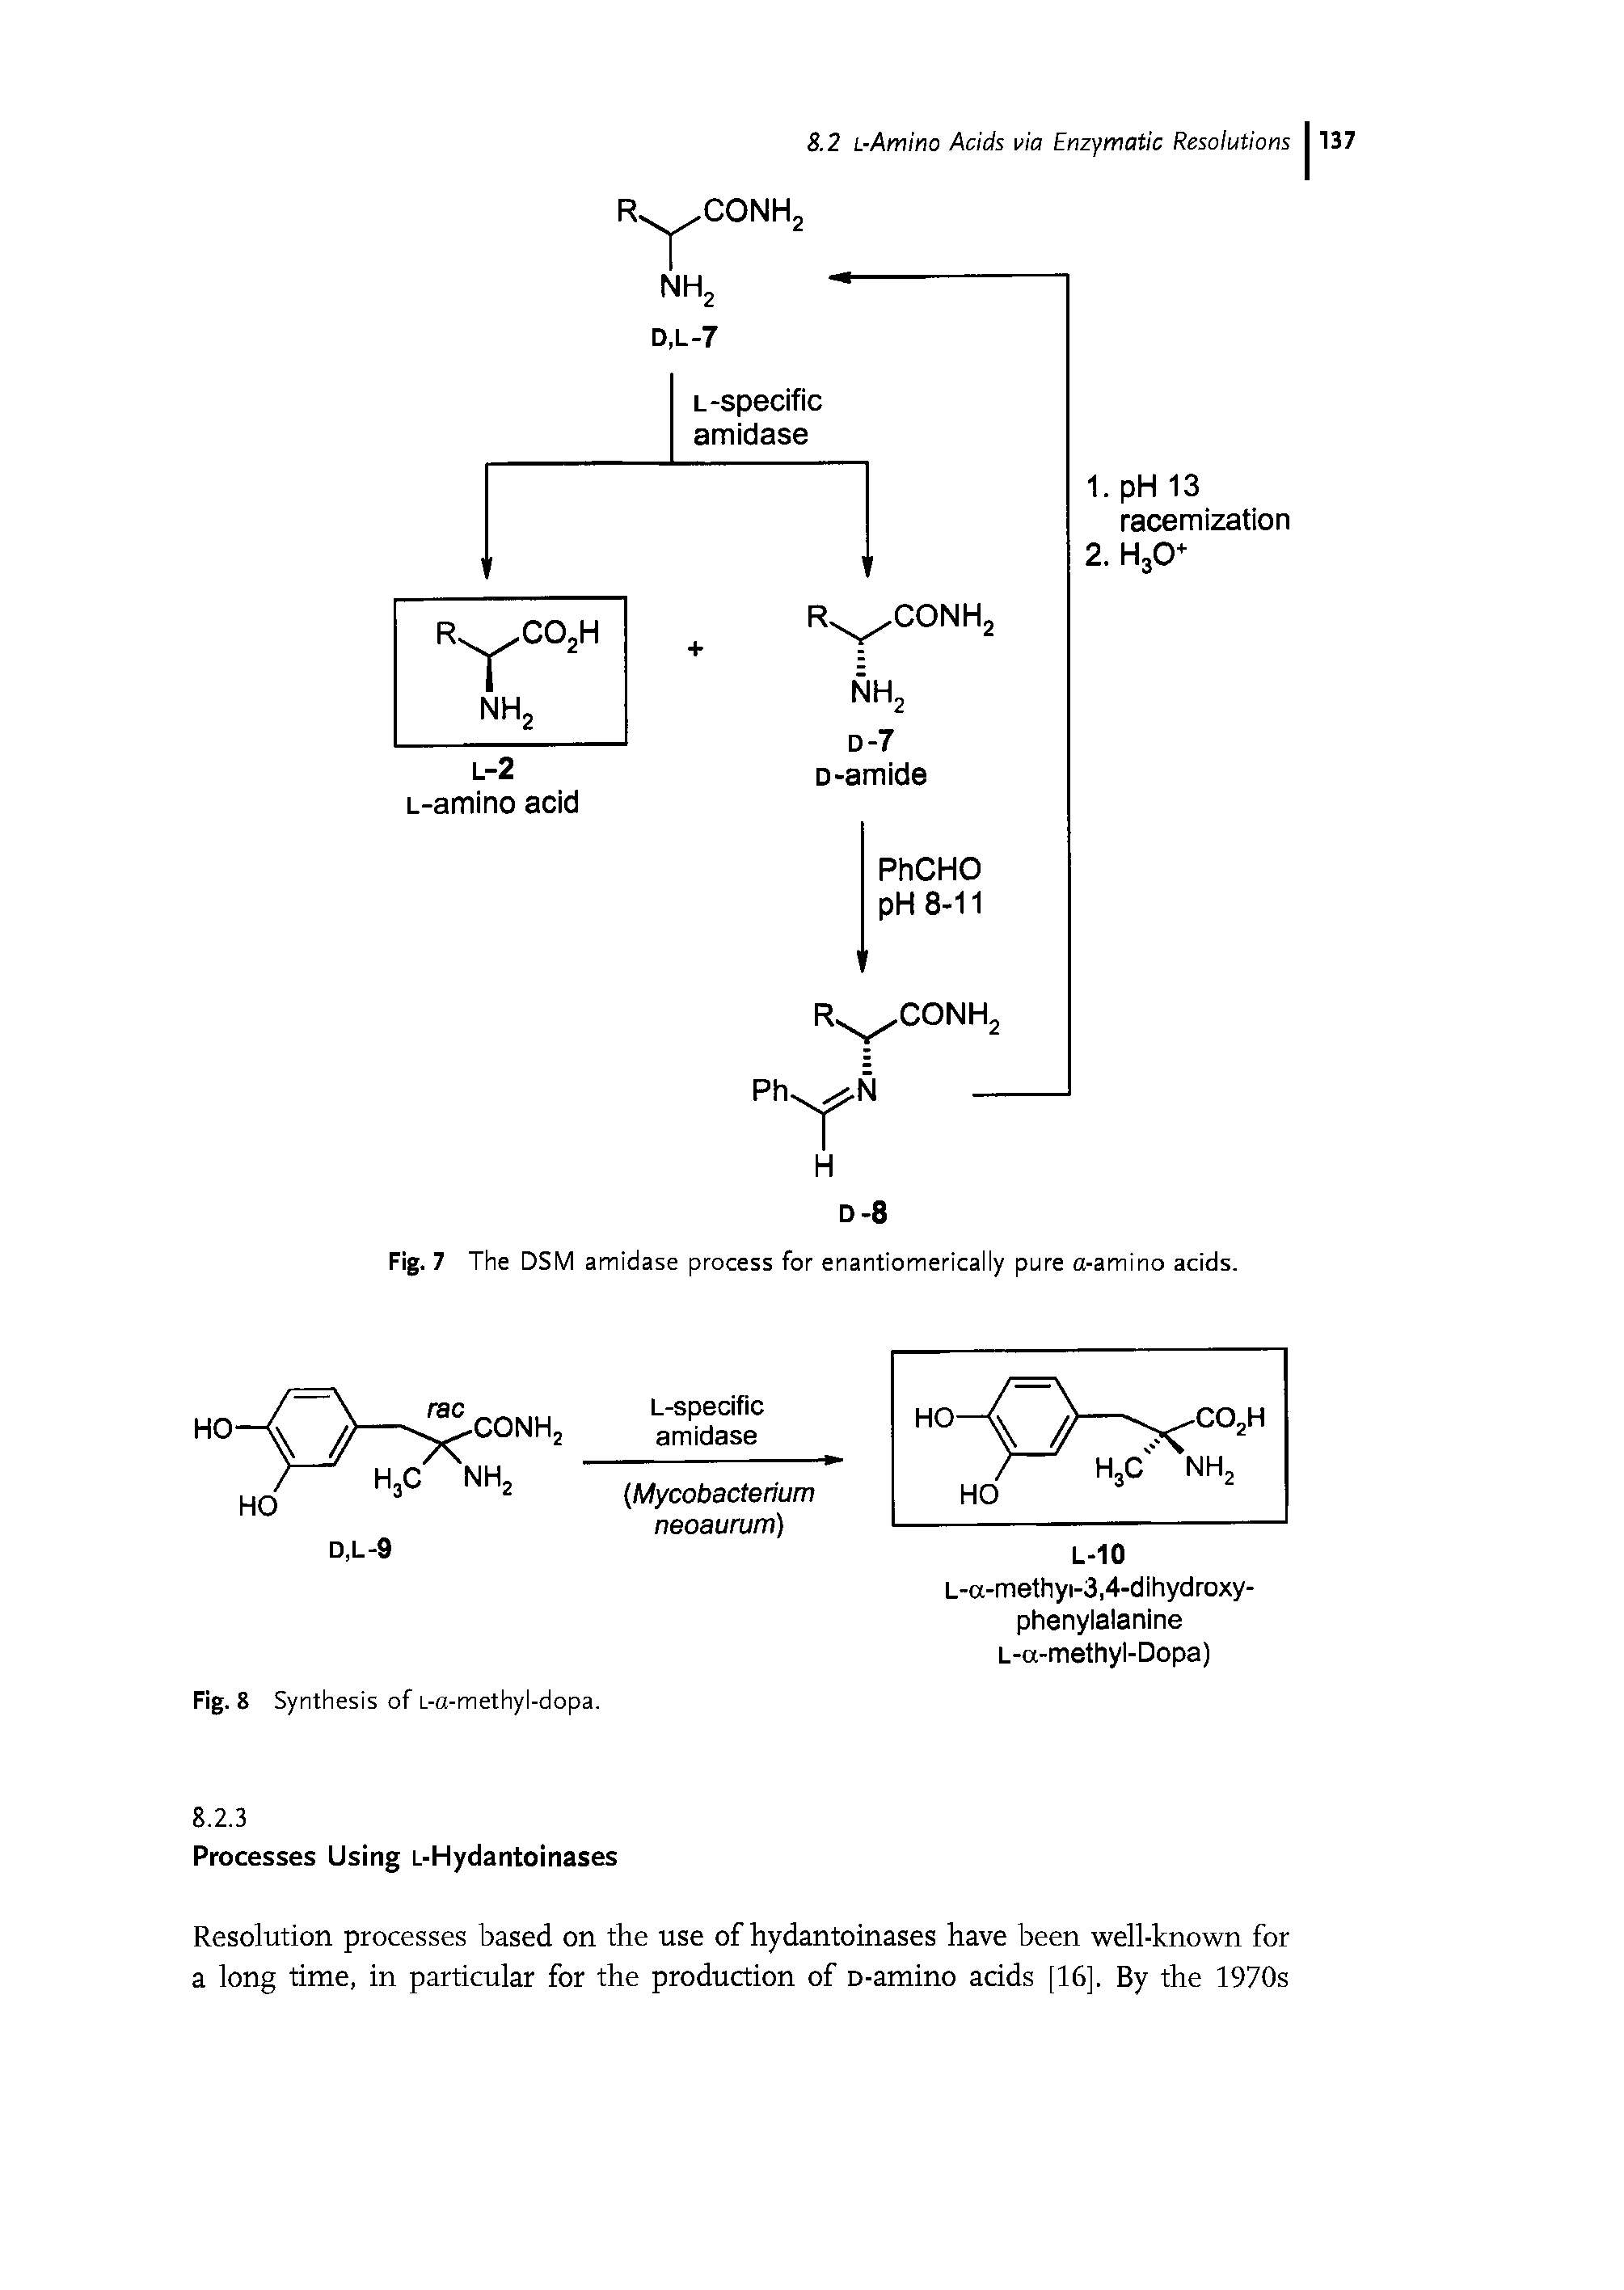 Fig. 7 The DSM amidase process for enantiomerically pure a-amino acids.